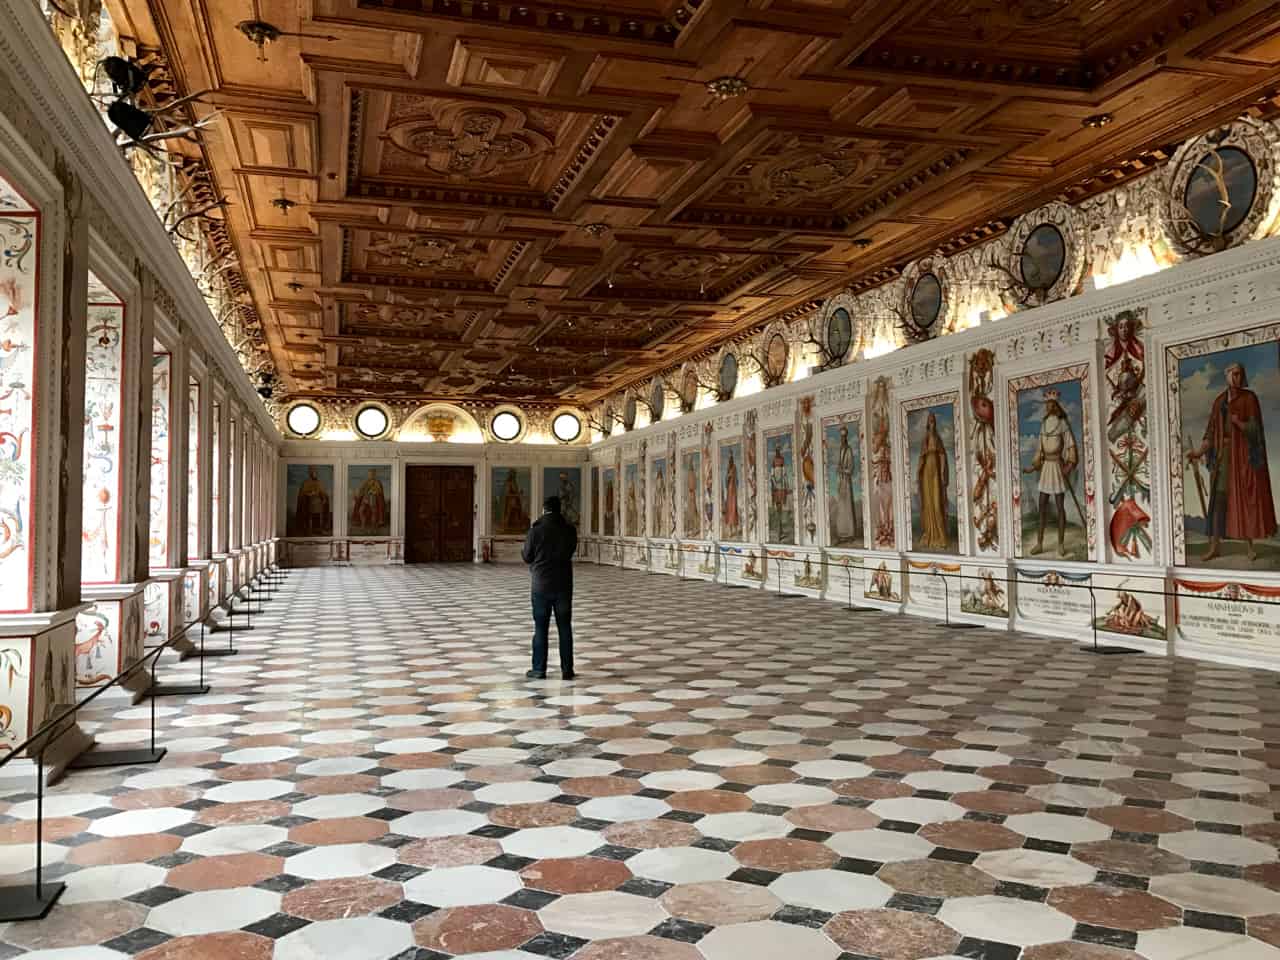 The Spanish Hall at Ambras Castle in Innsbruck.